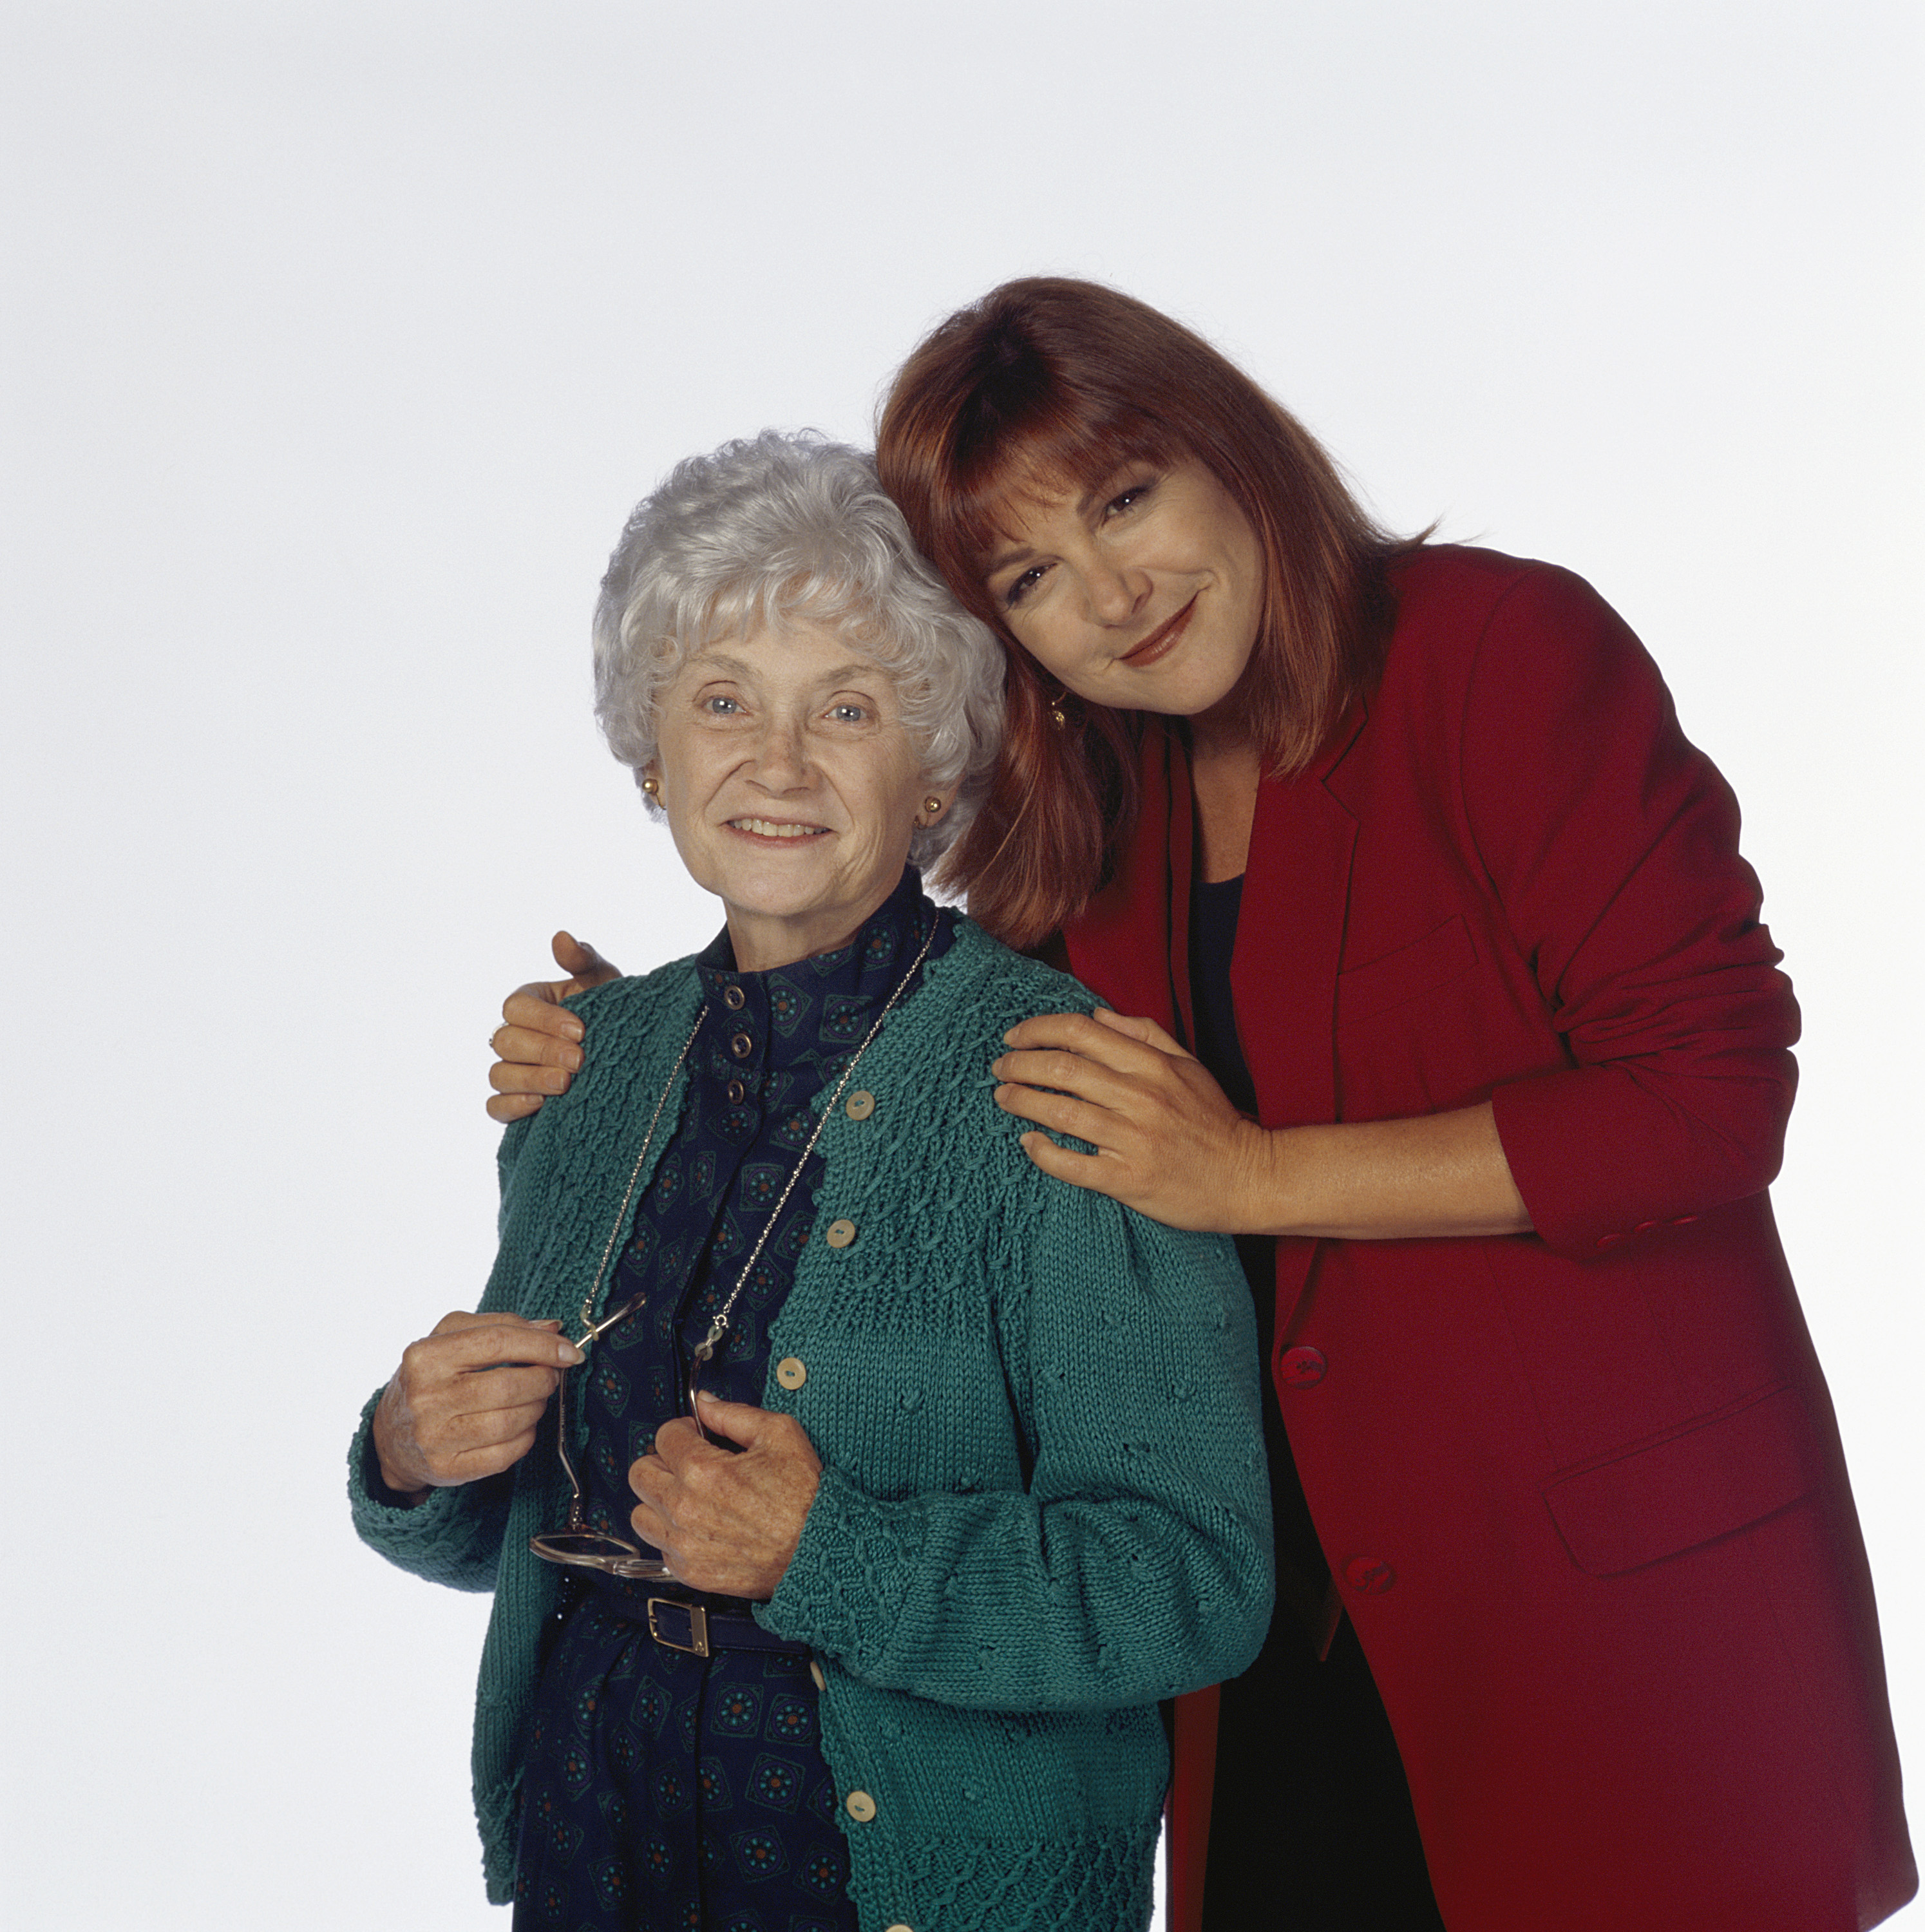 Estelle Getty and Dinah Manoff on the set of "Empty Nest," 2007 | Source: Getty Images